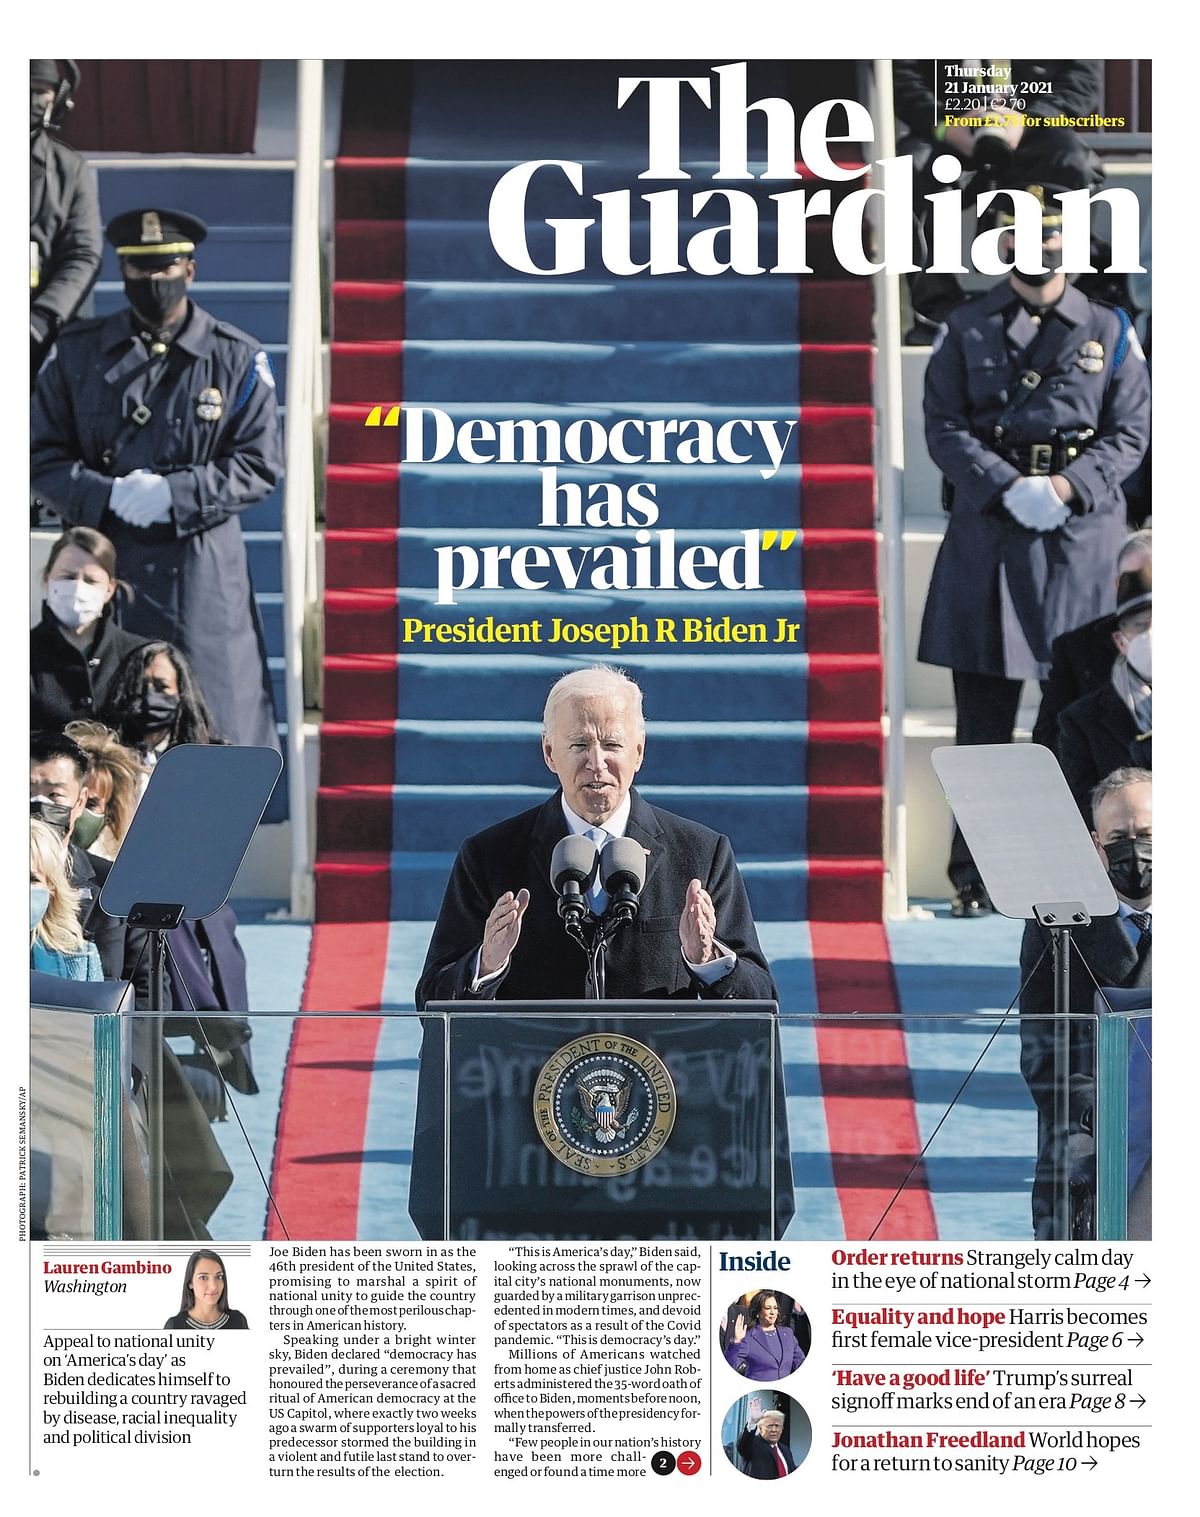 Here is a look at how major newspapers across the world and at home reported President Biden’s inauguration.